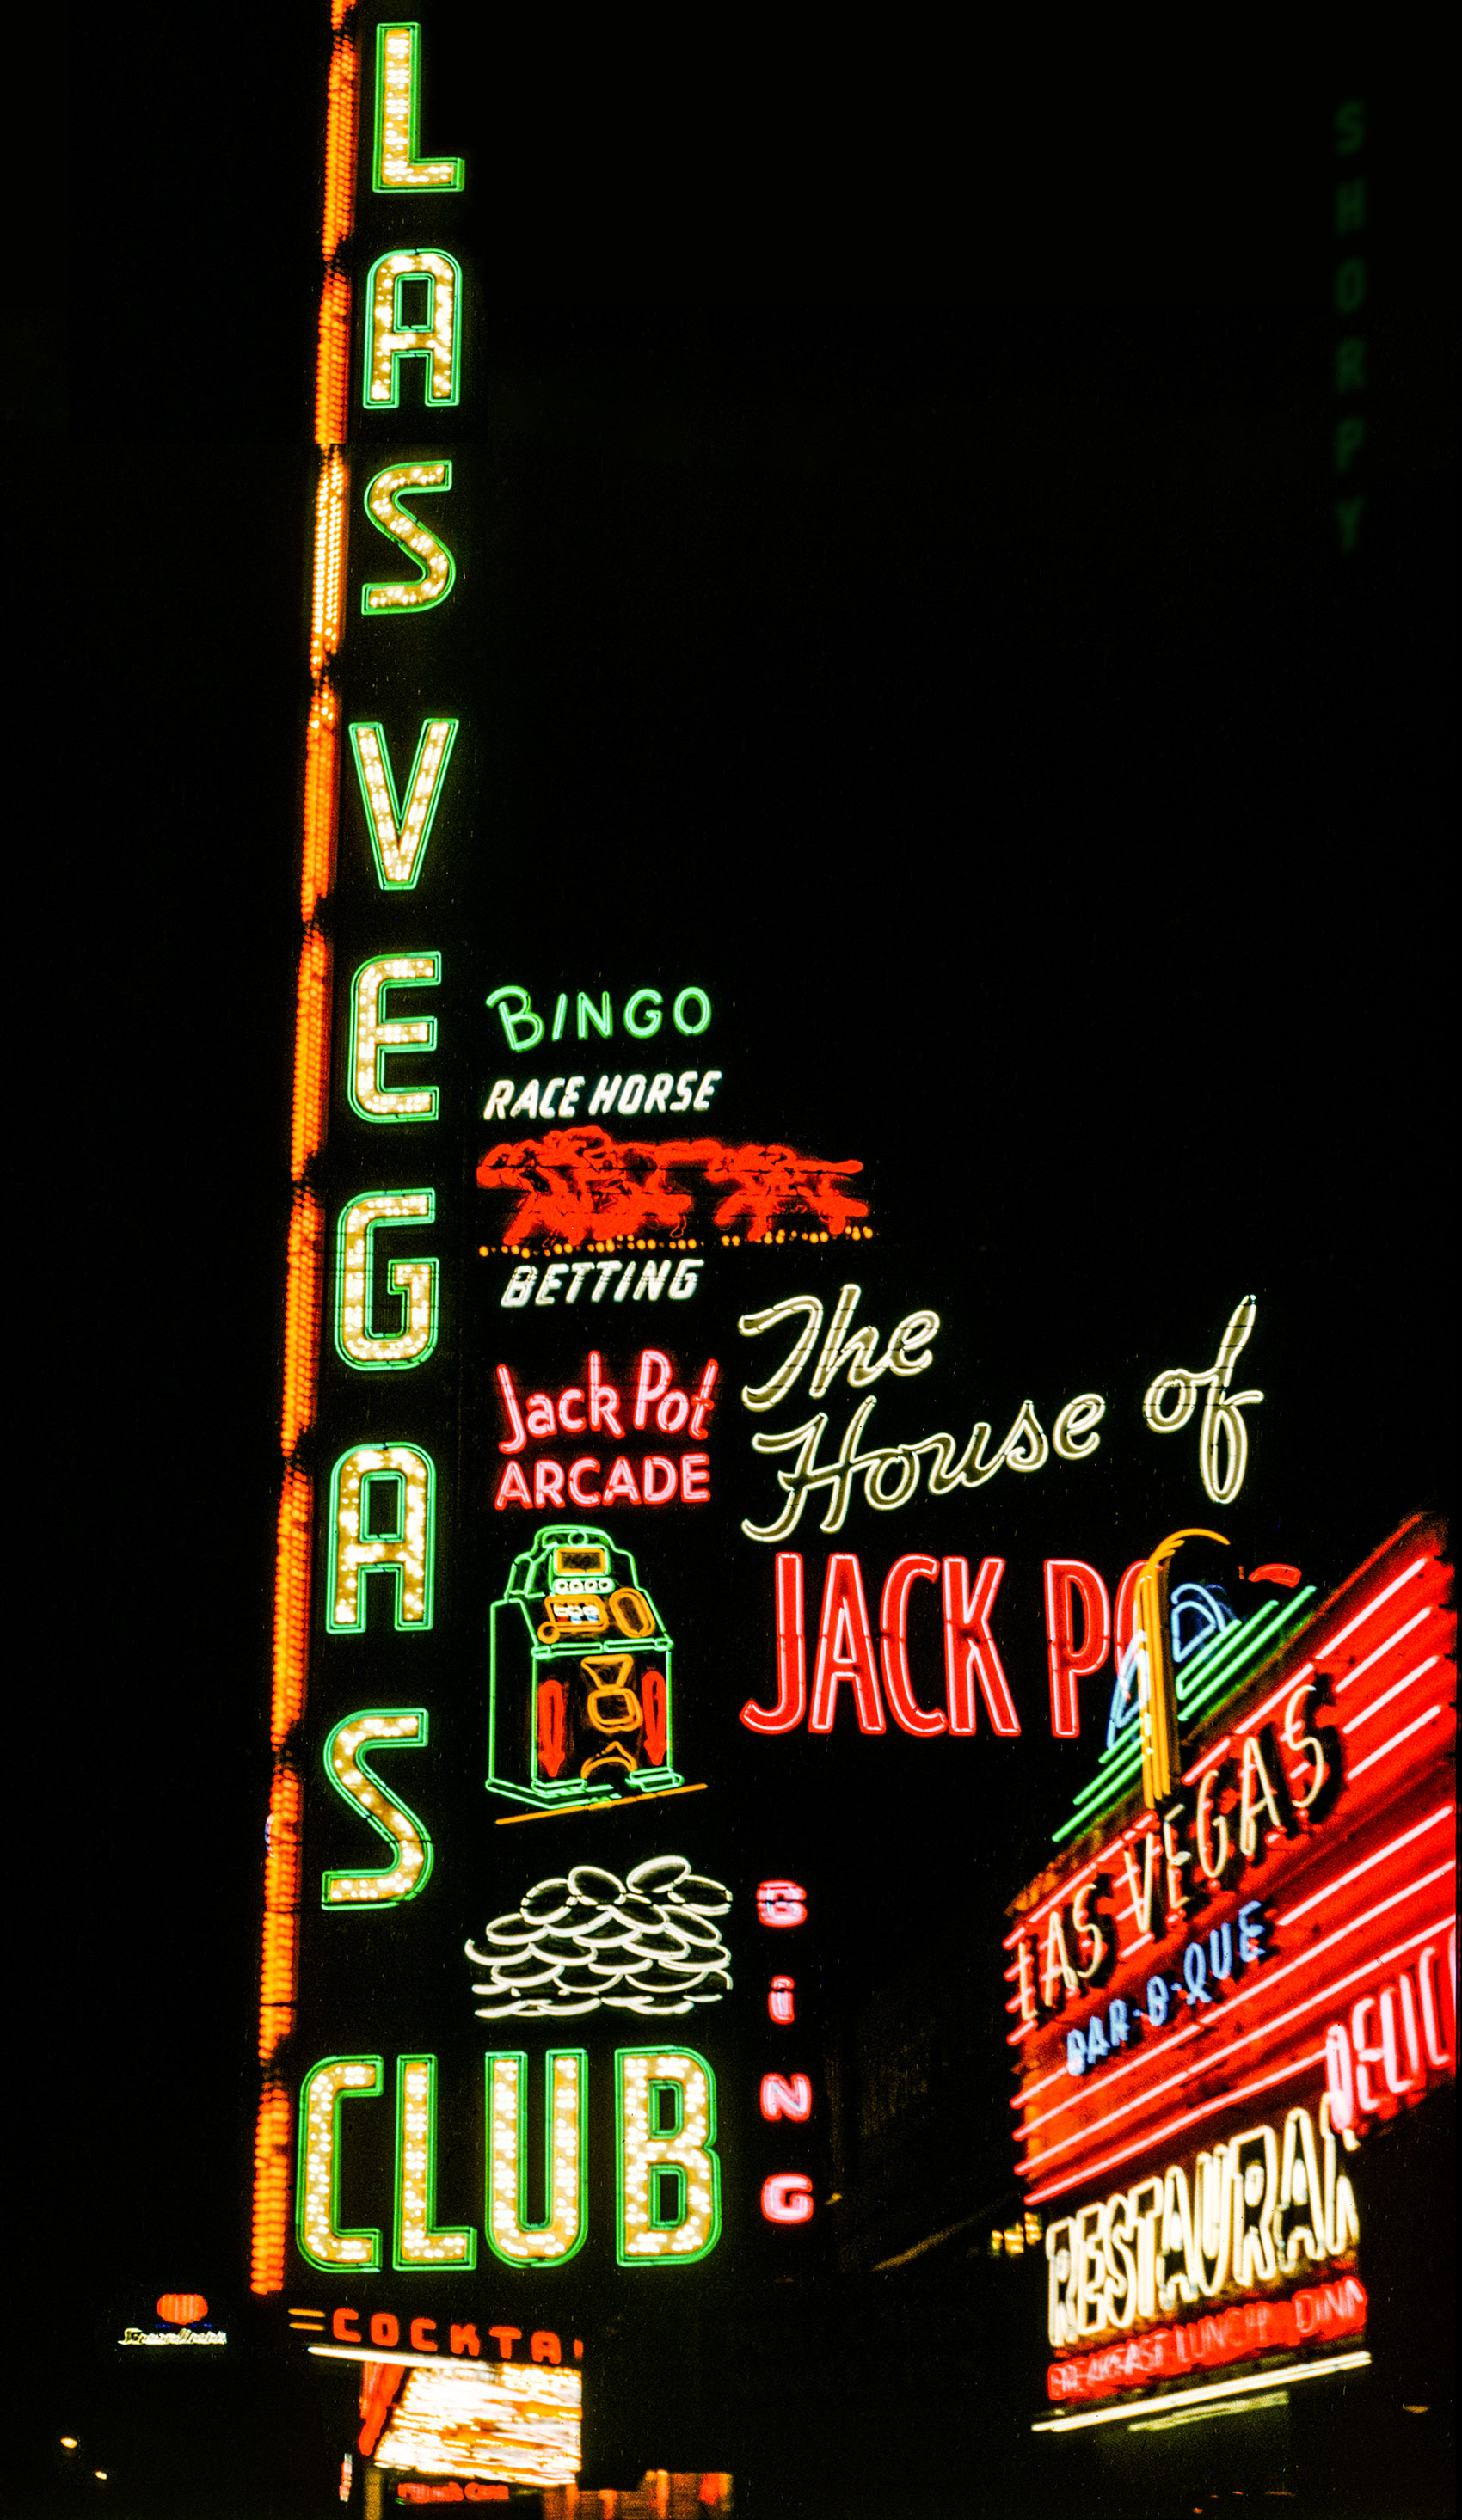 From 1951 and Don Cox comes our second nighttime glimpse of the Las Vegas Club, "The House of Jack Pots." 35mm Kodachrome transparency. View full size.